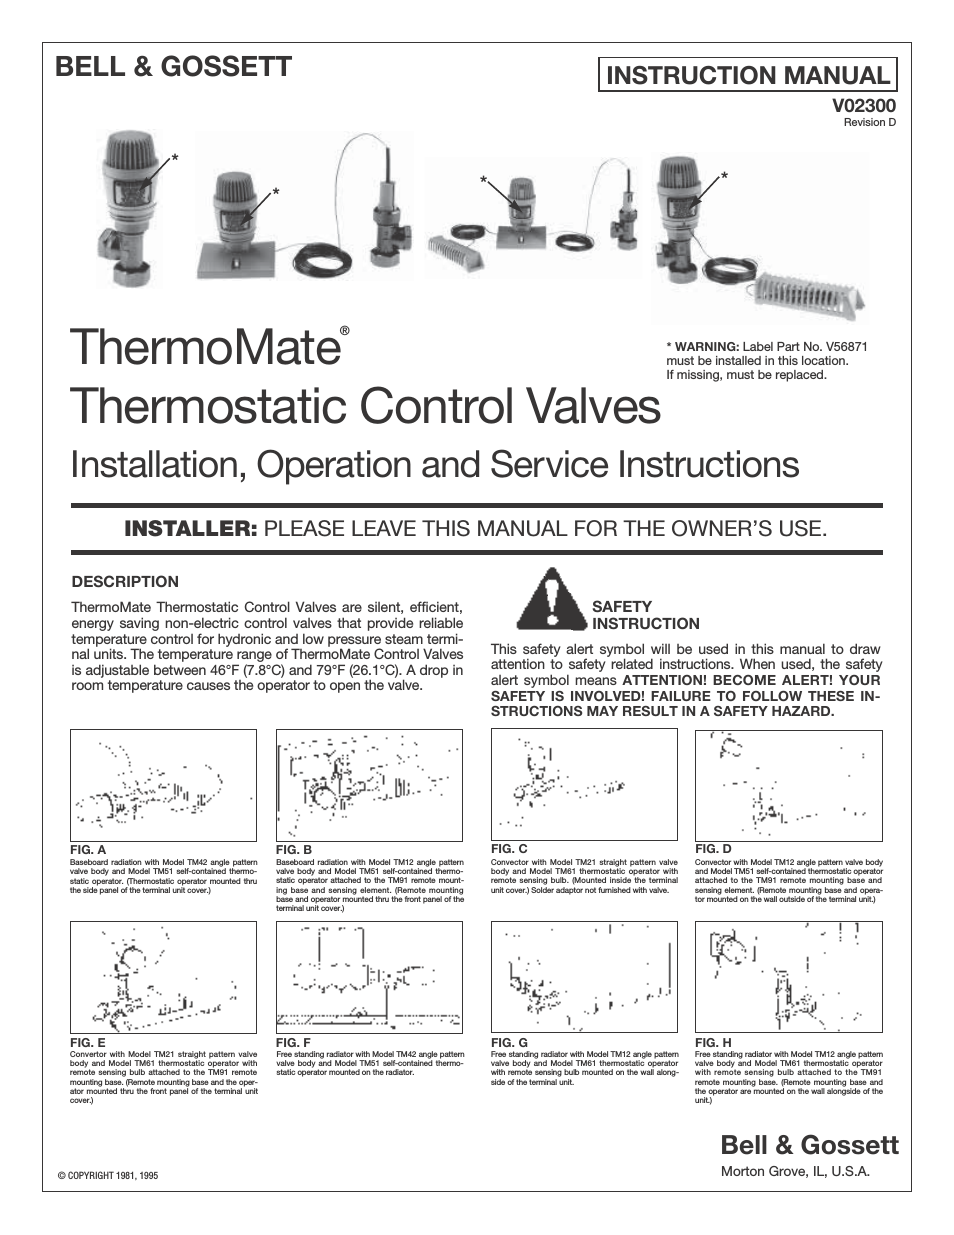 V02300D ThermoMate Thermostatic Control Valves